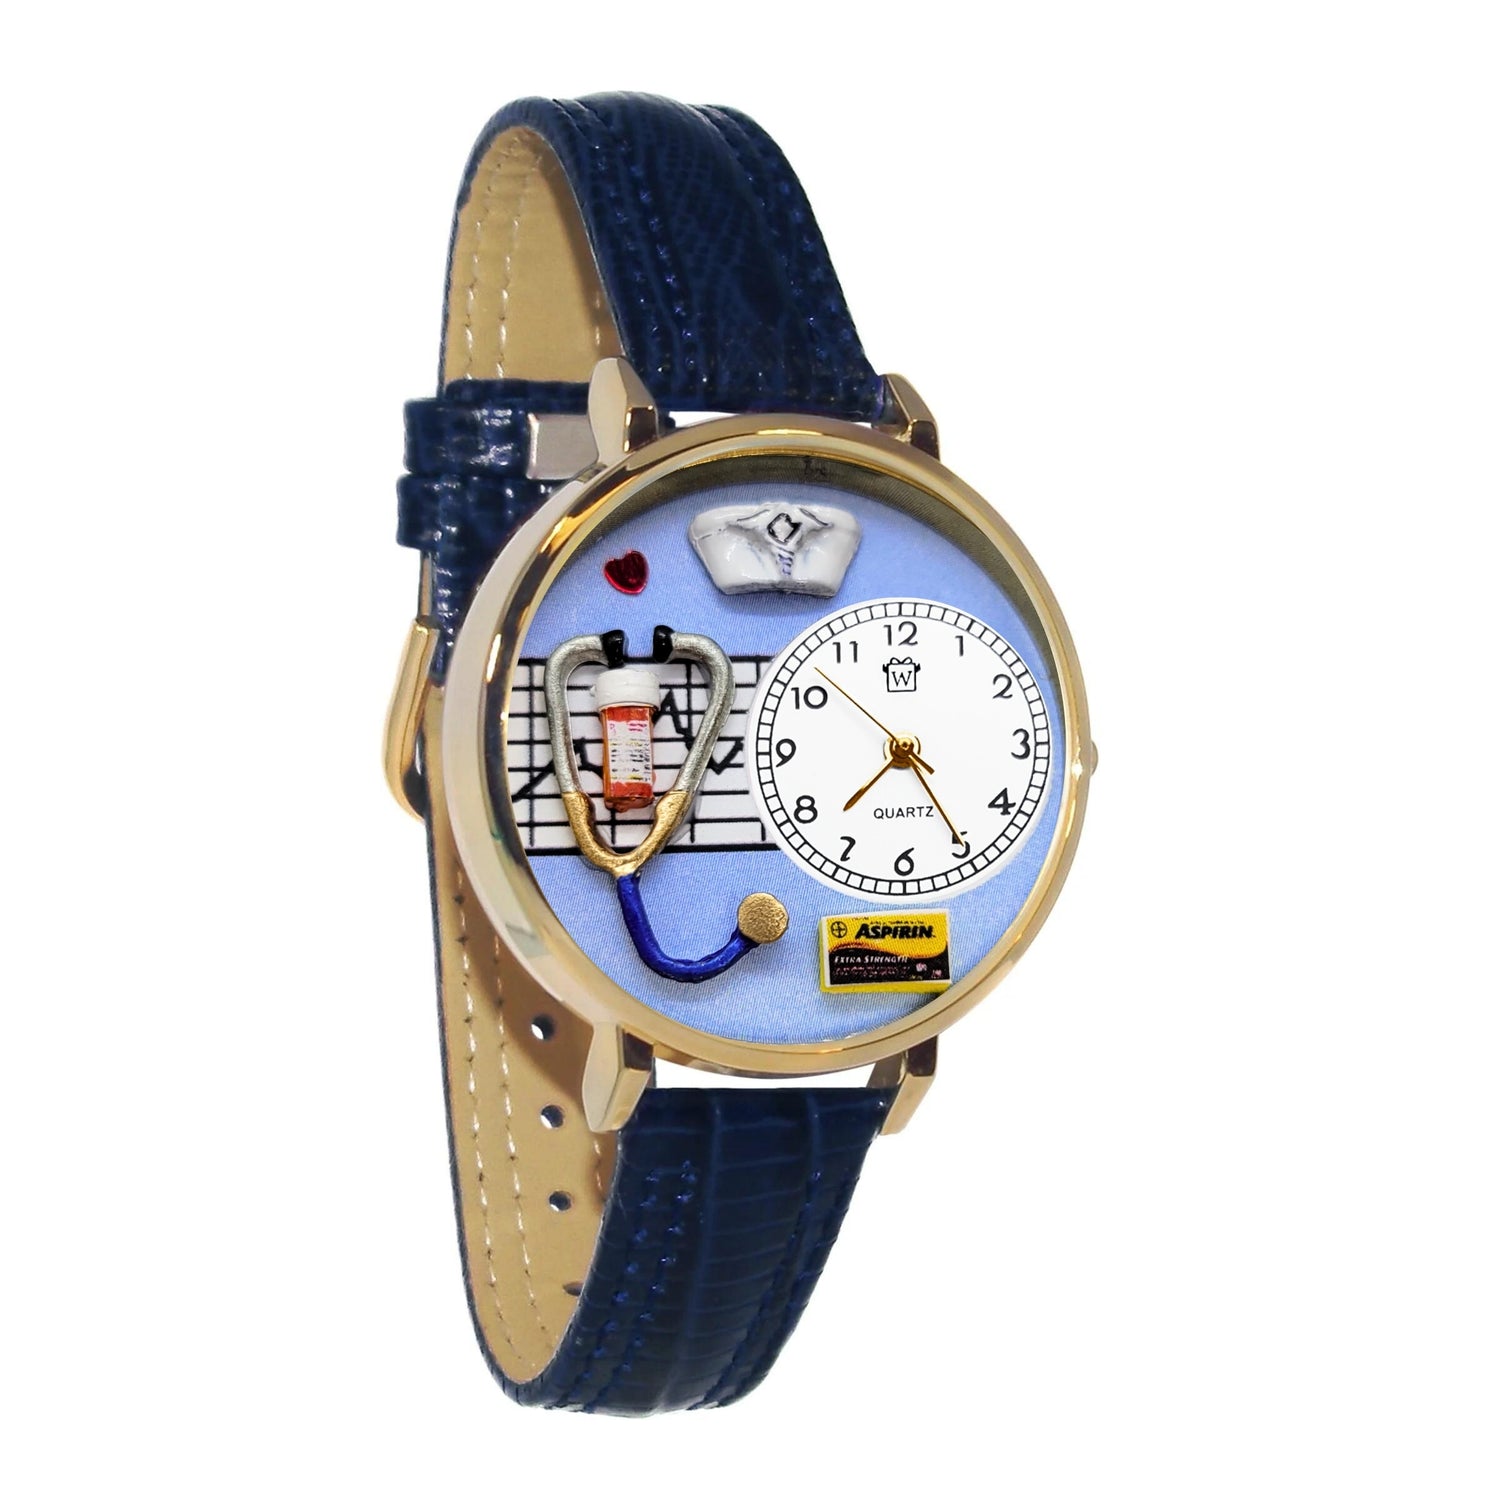 Whimsical Gifts | Nurse Blue 3D Watch Large Style | Handmade in USA | Professions Themed | Nurse | Novelty Unique Fun Miniatures Gift | Gold Finish Navy Leather Watch Band